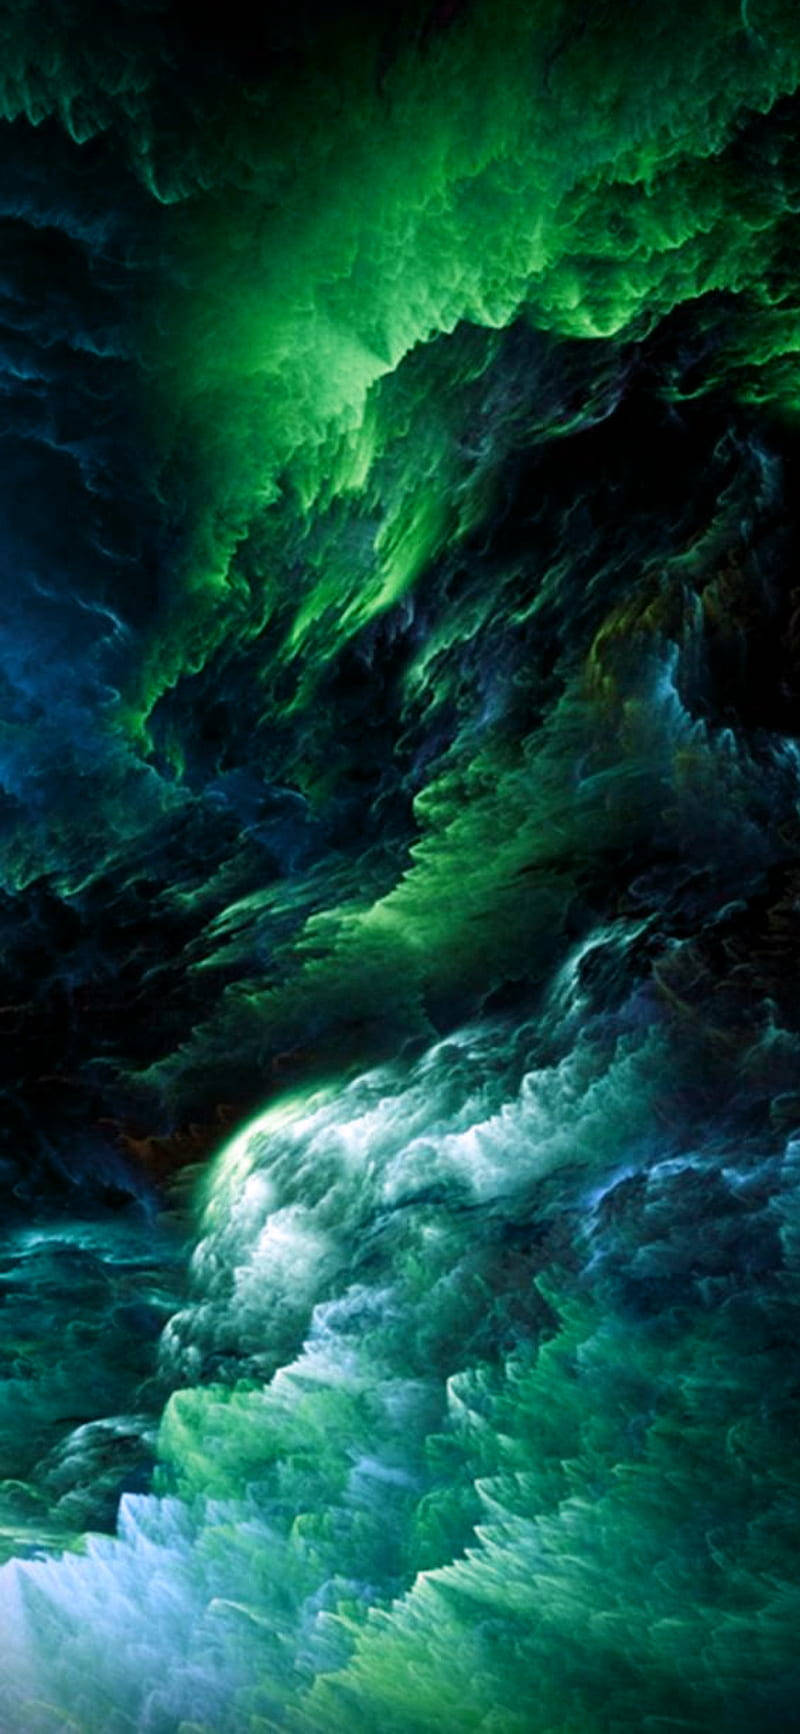 Rock And Crystal Formations Green Iphone Wallpaper